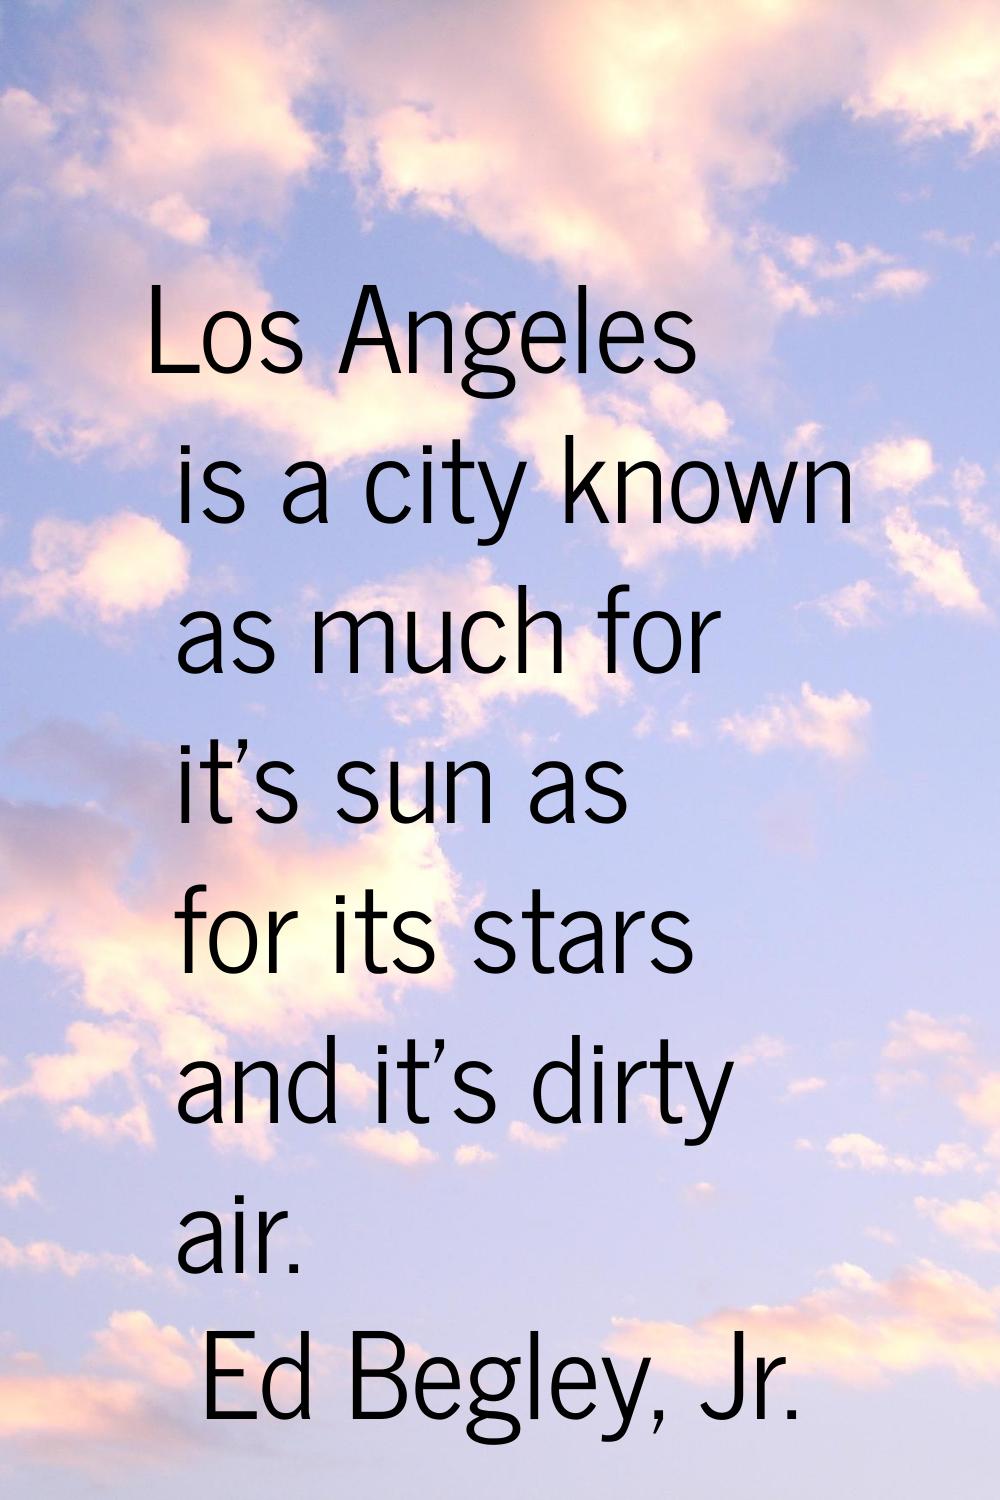 Los Angeles is a city known as much for it's sun as for its stars and it's dirty air.